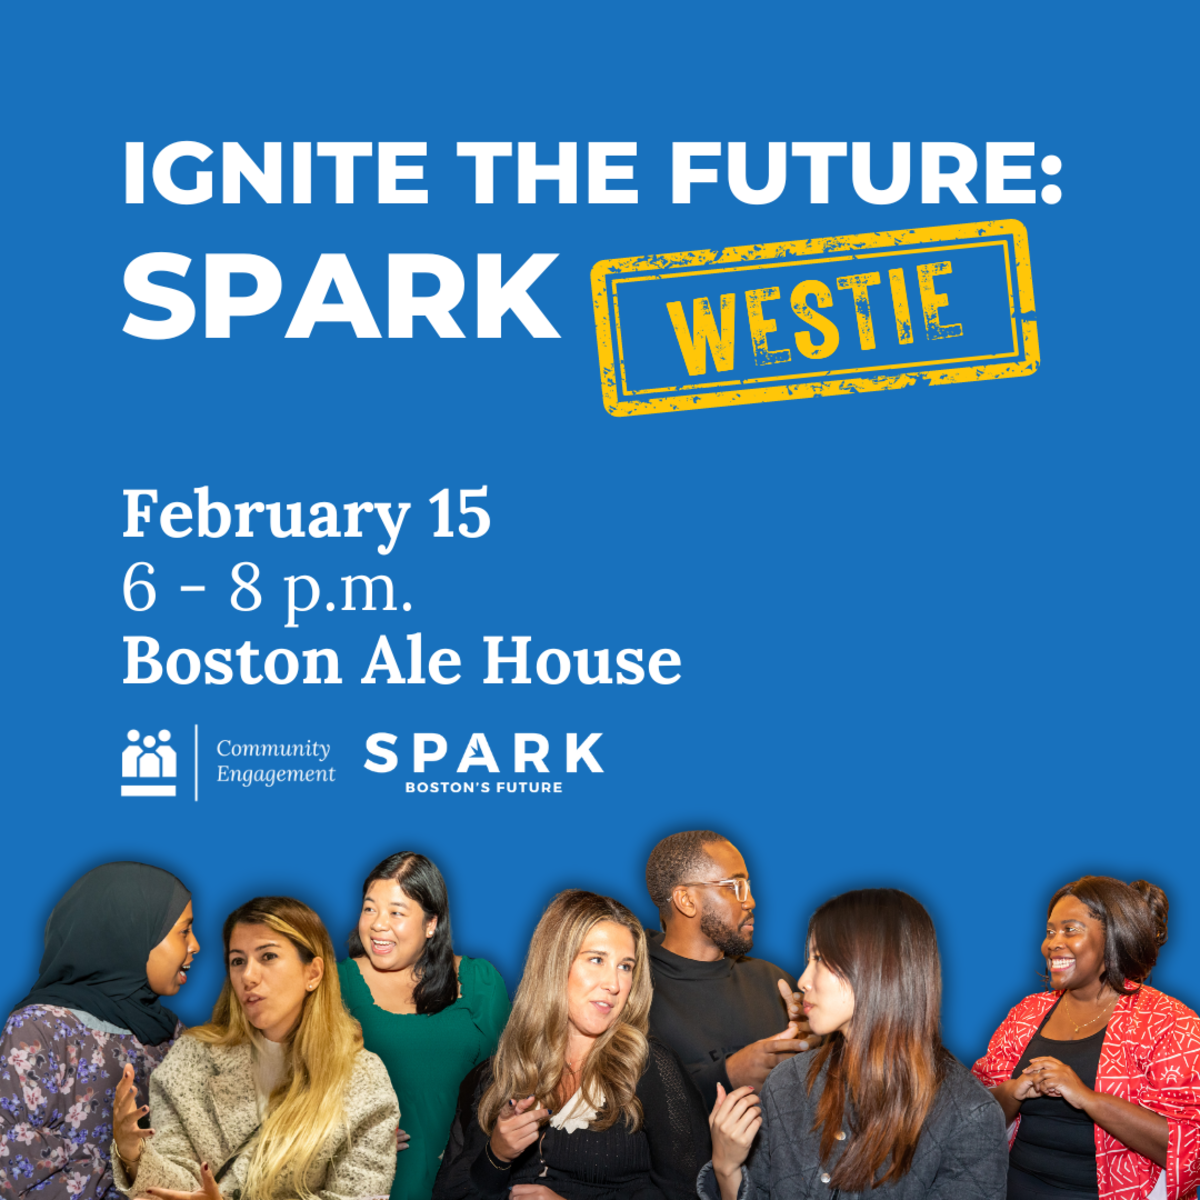 Blue Graphic with cut outs of photographed individuals at the bottom and text "Ignite the Future: SPARK Westie February 15 from 6-8 p.m. at Boston Ale House"